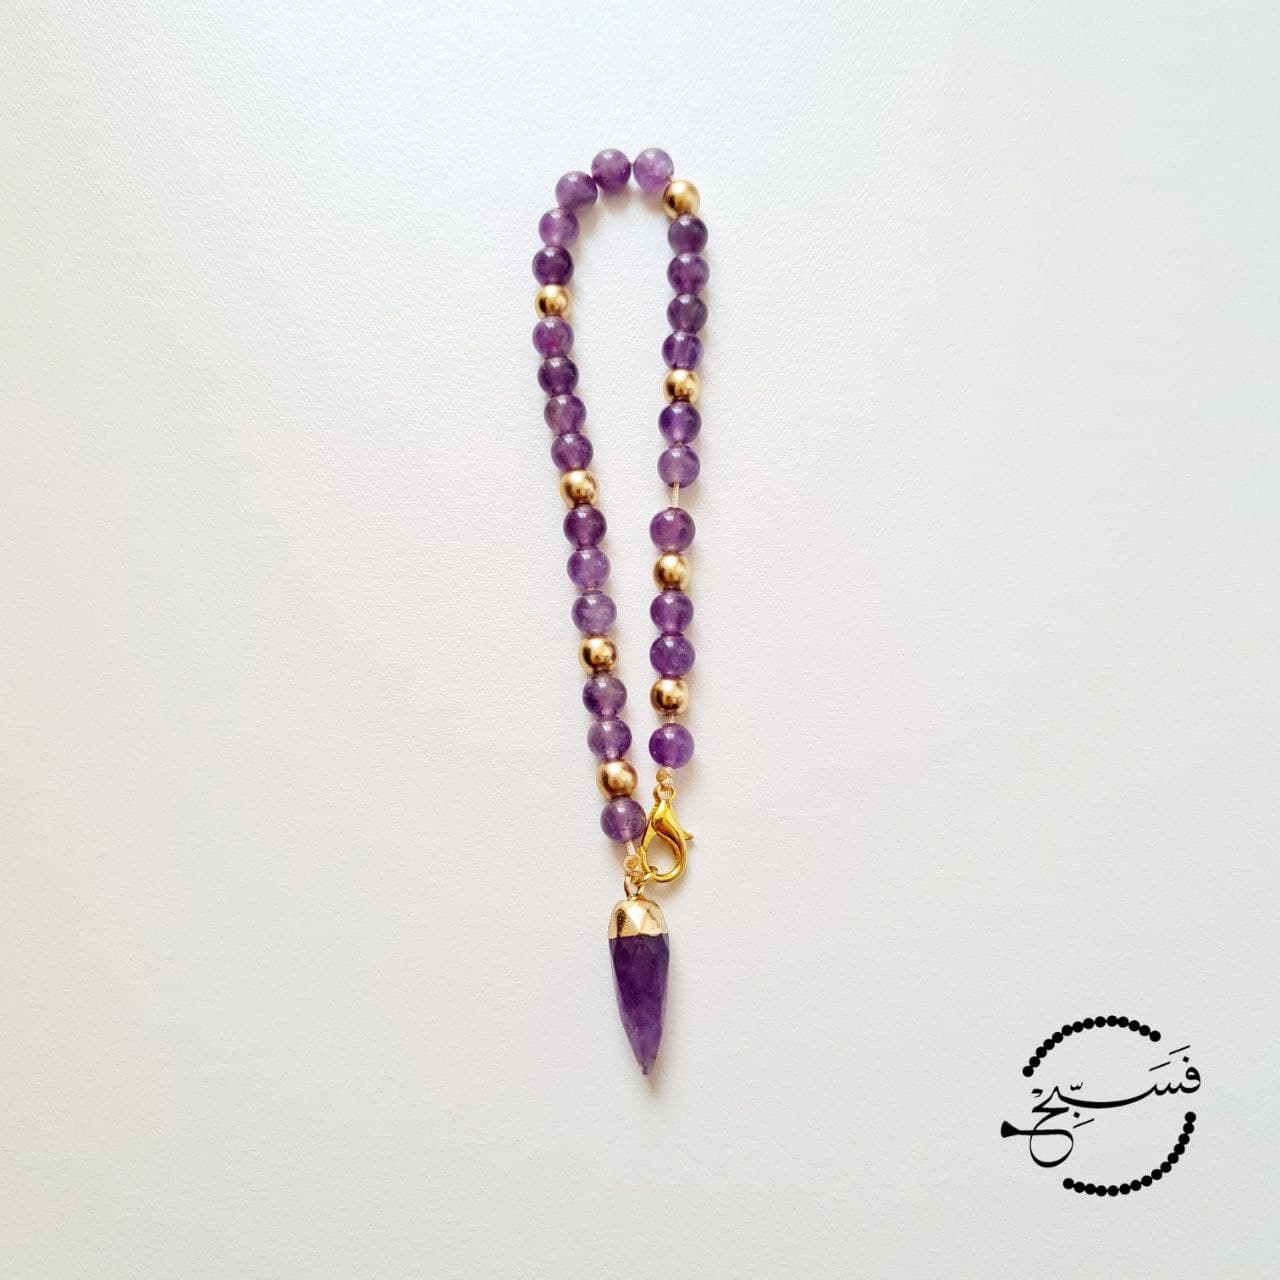 Amethyst & matte gold beads paired with an amethyst pendant.   33 bead tasbih that can be attached to your bag.   Packaged in a luxurious pouch and a gift box.